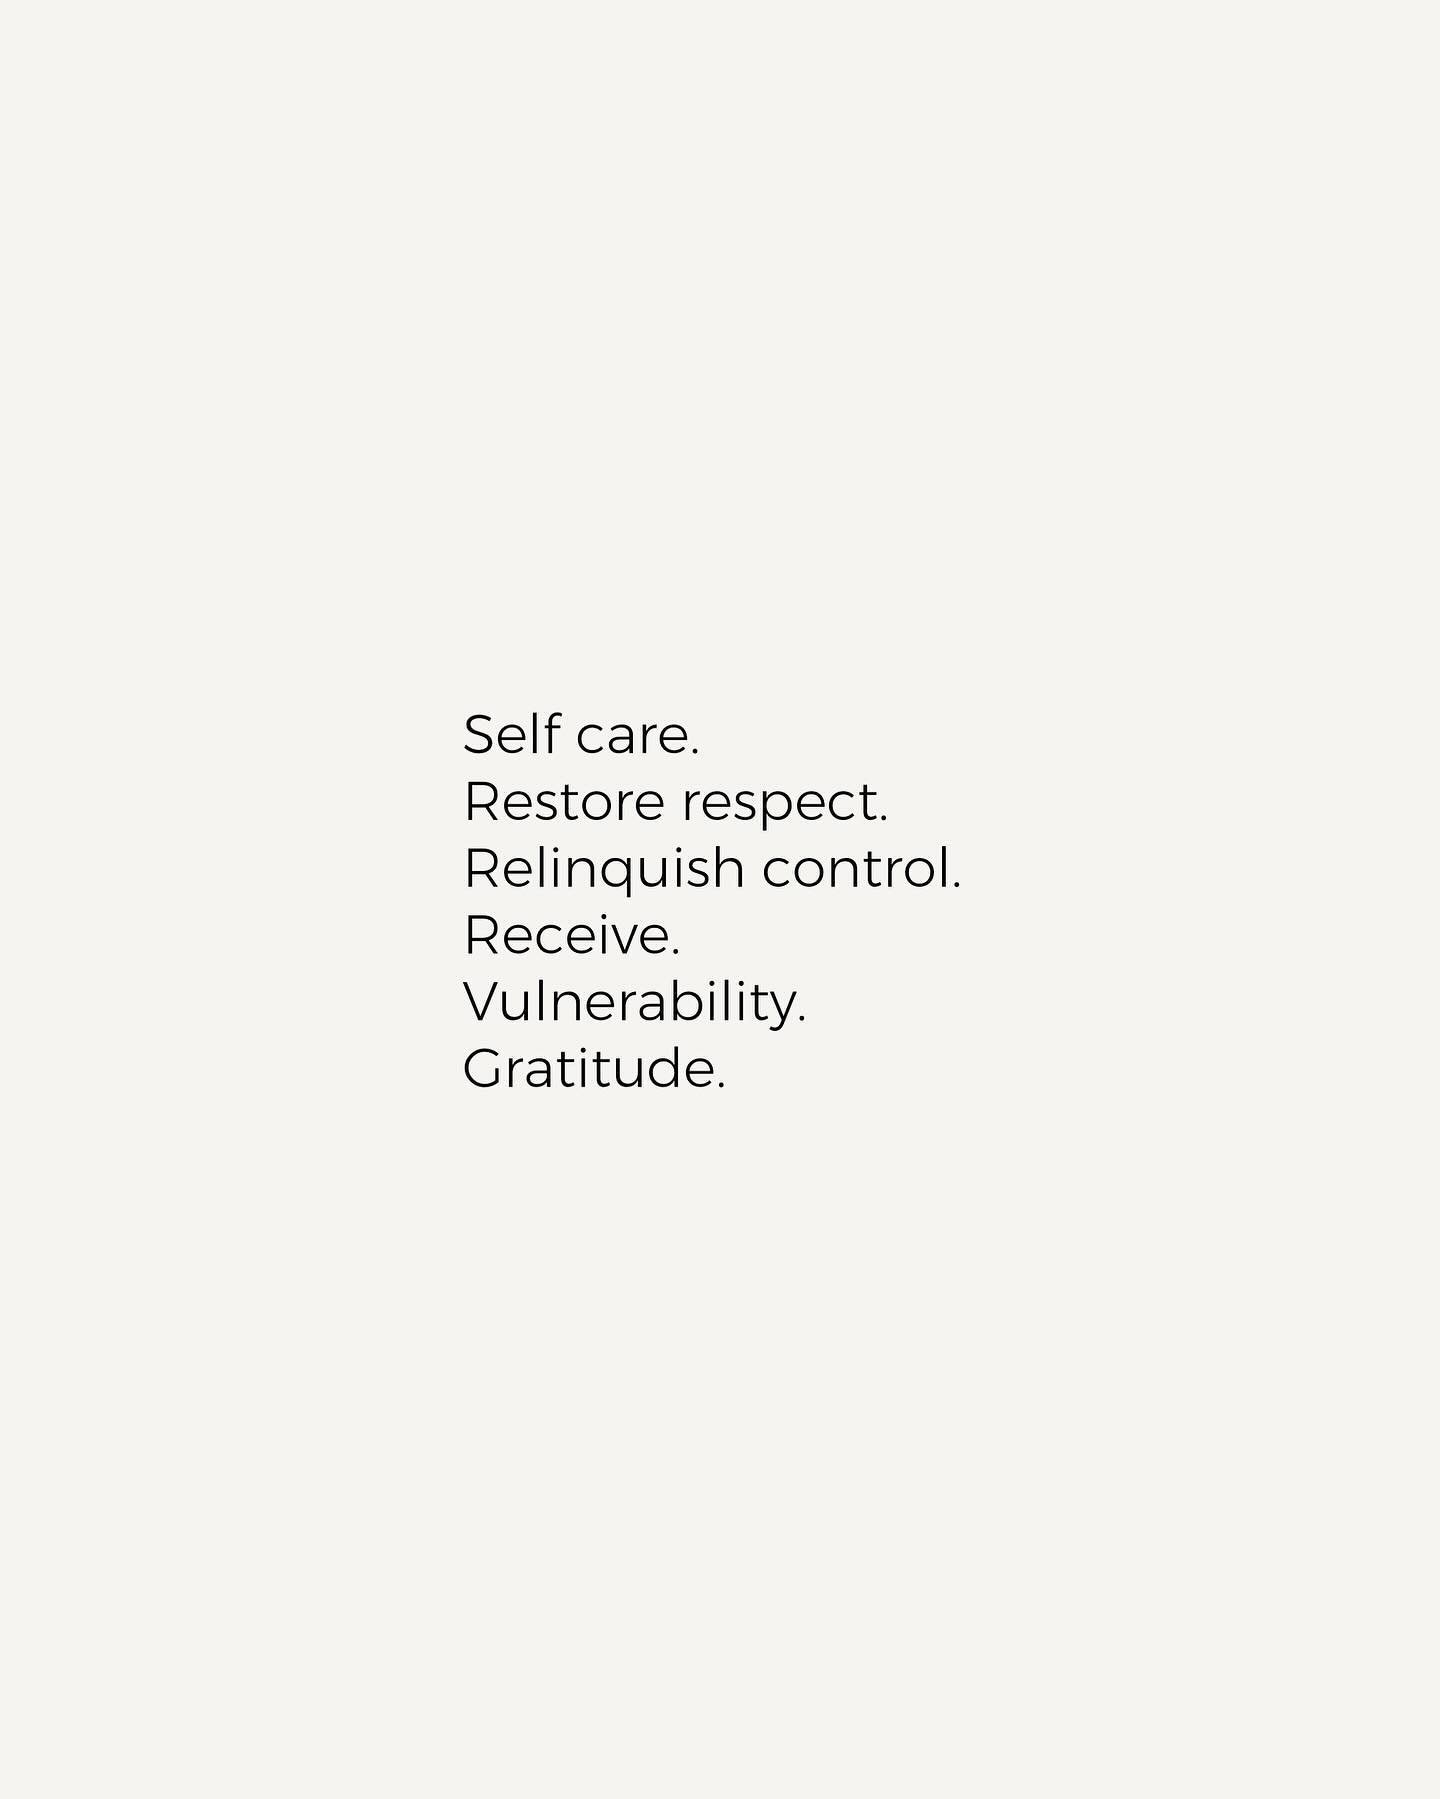 These are the six skills that changed me and the way I relate to myself, others and the world. They helped me cultivate a very fruitful, connected life and heal old, deep wounds by building on new experiences. I&rsquo;m forever grateful for this work